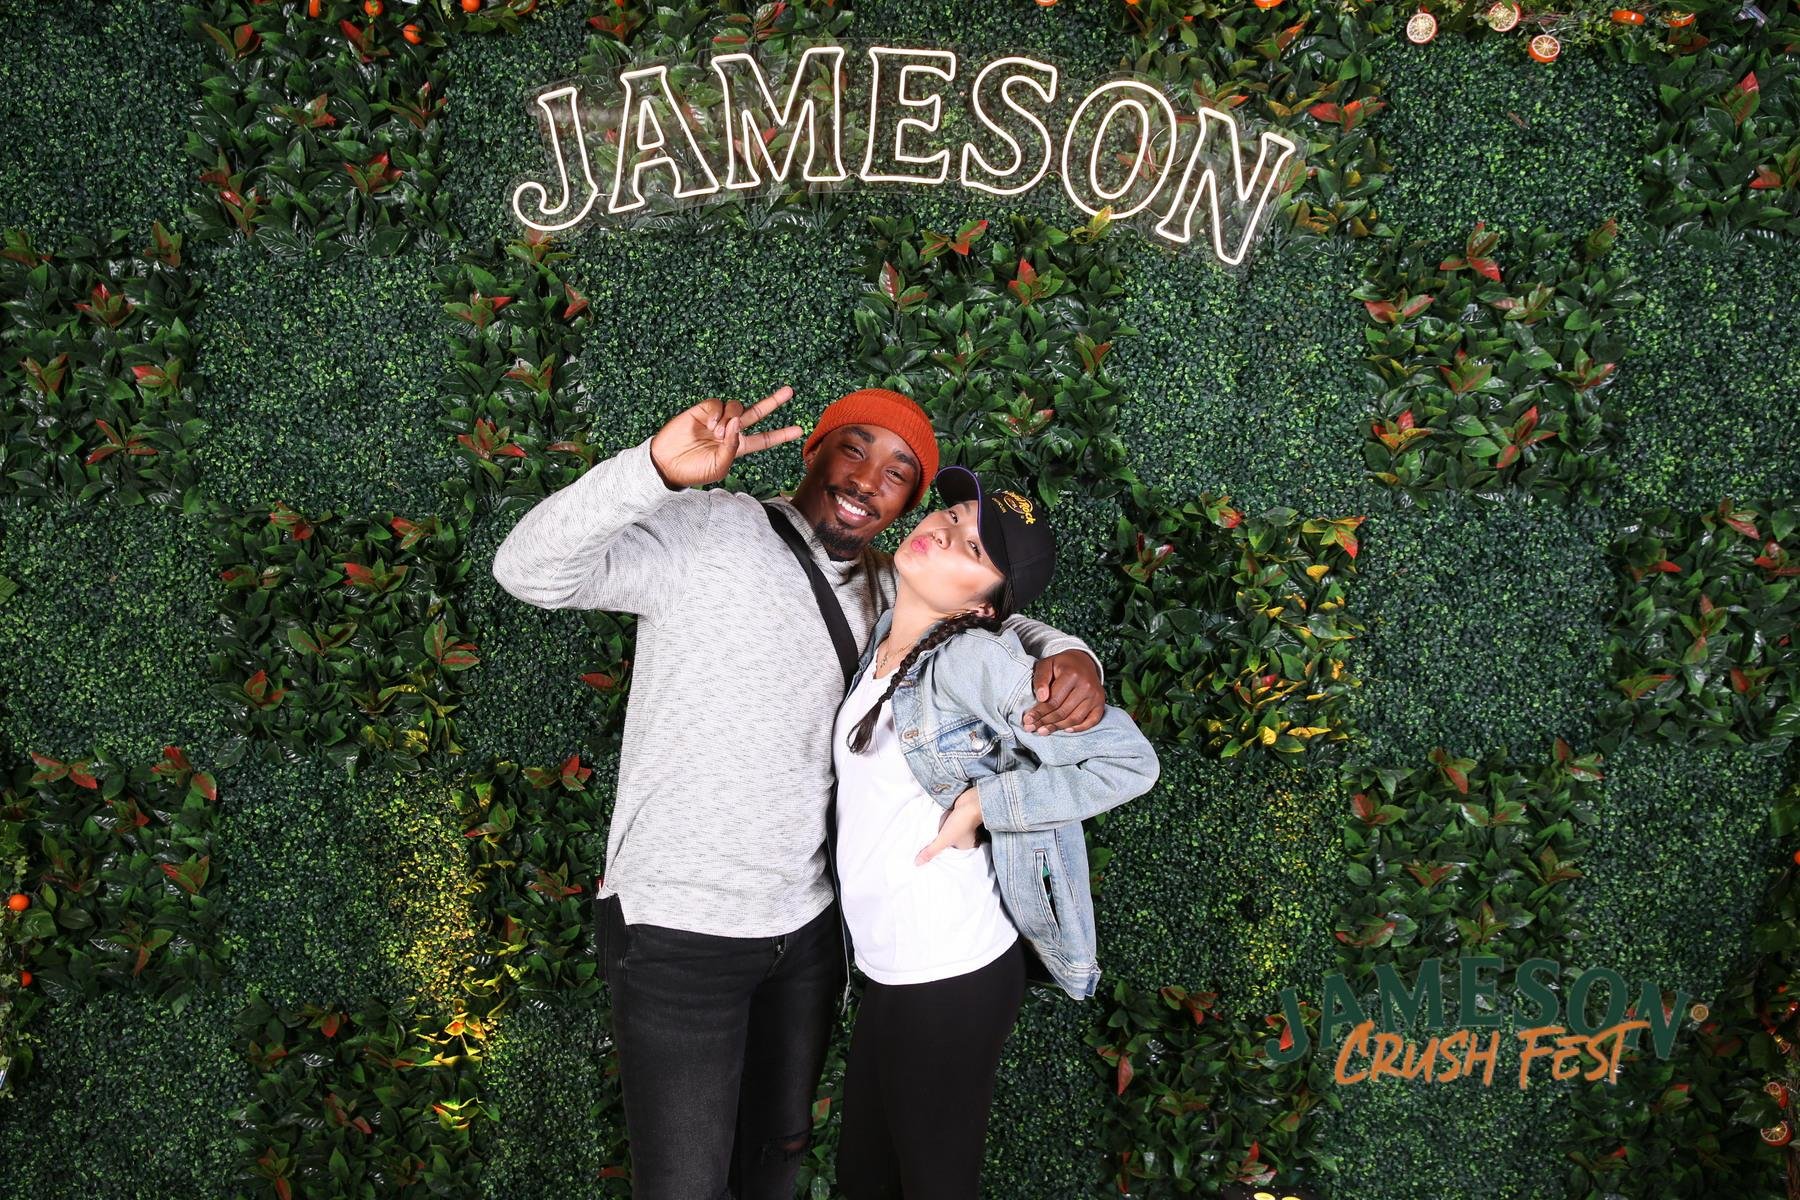 Smiling couple under Jameson sign